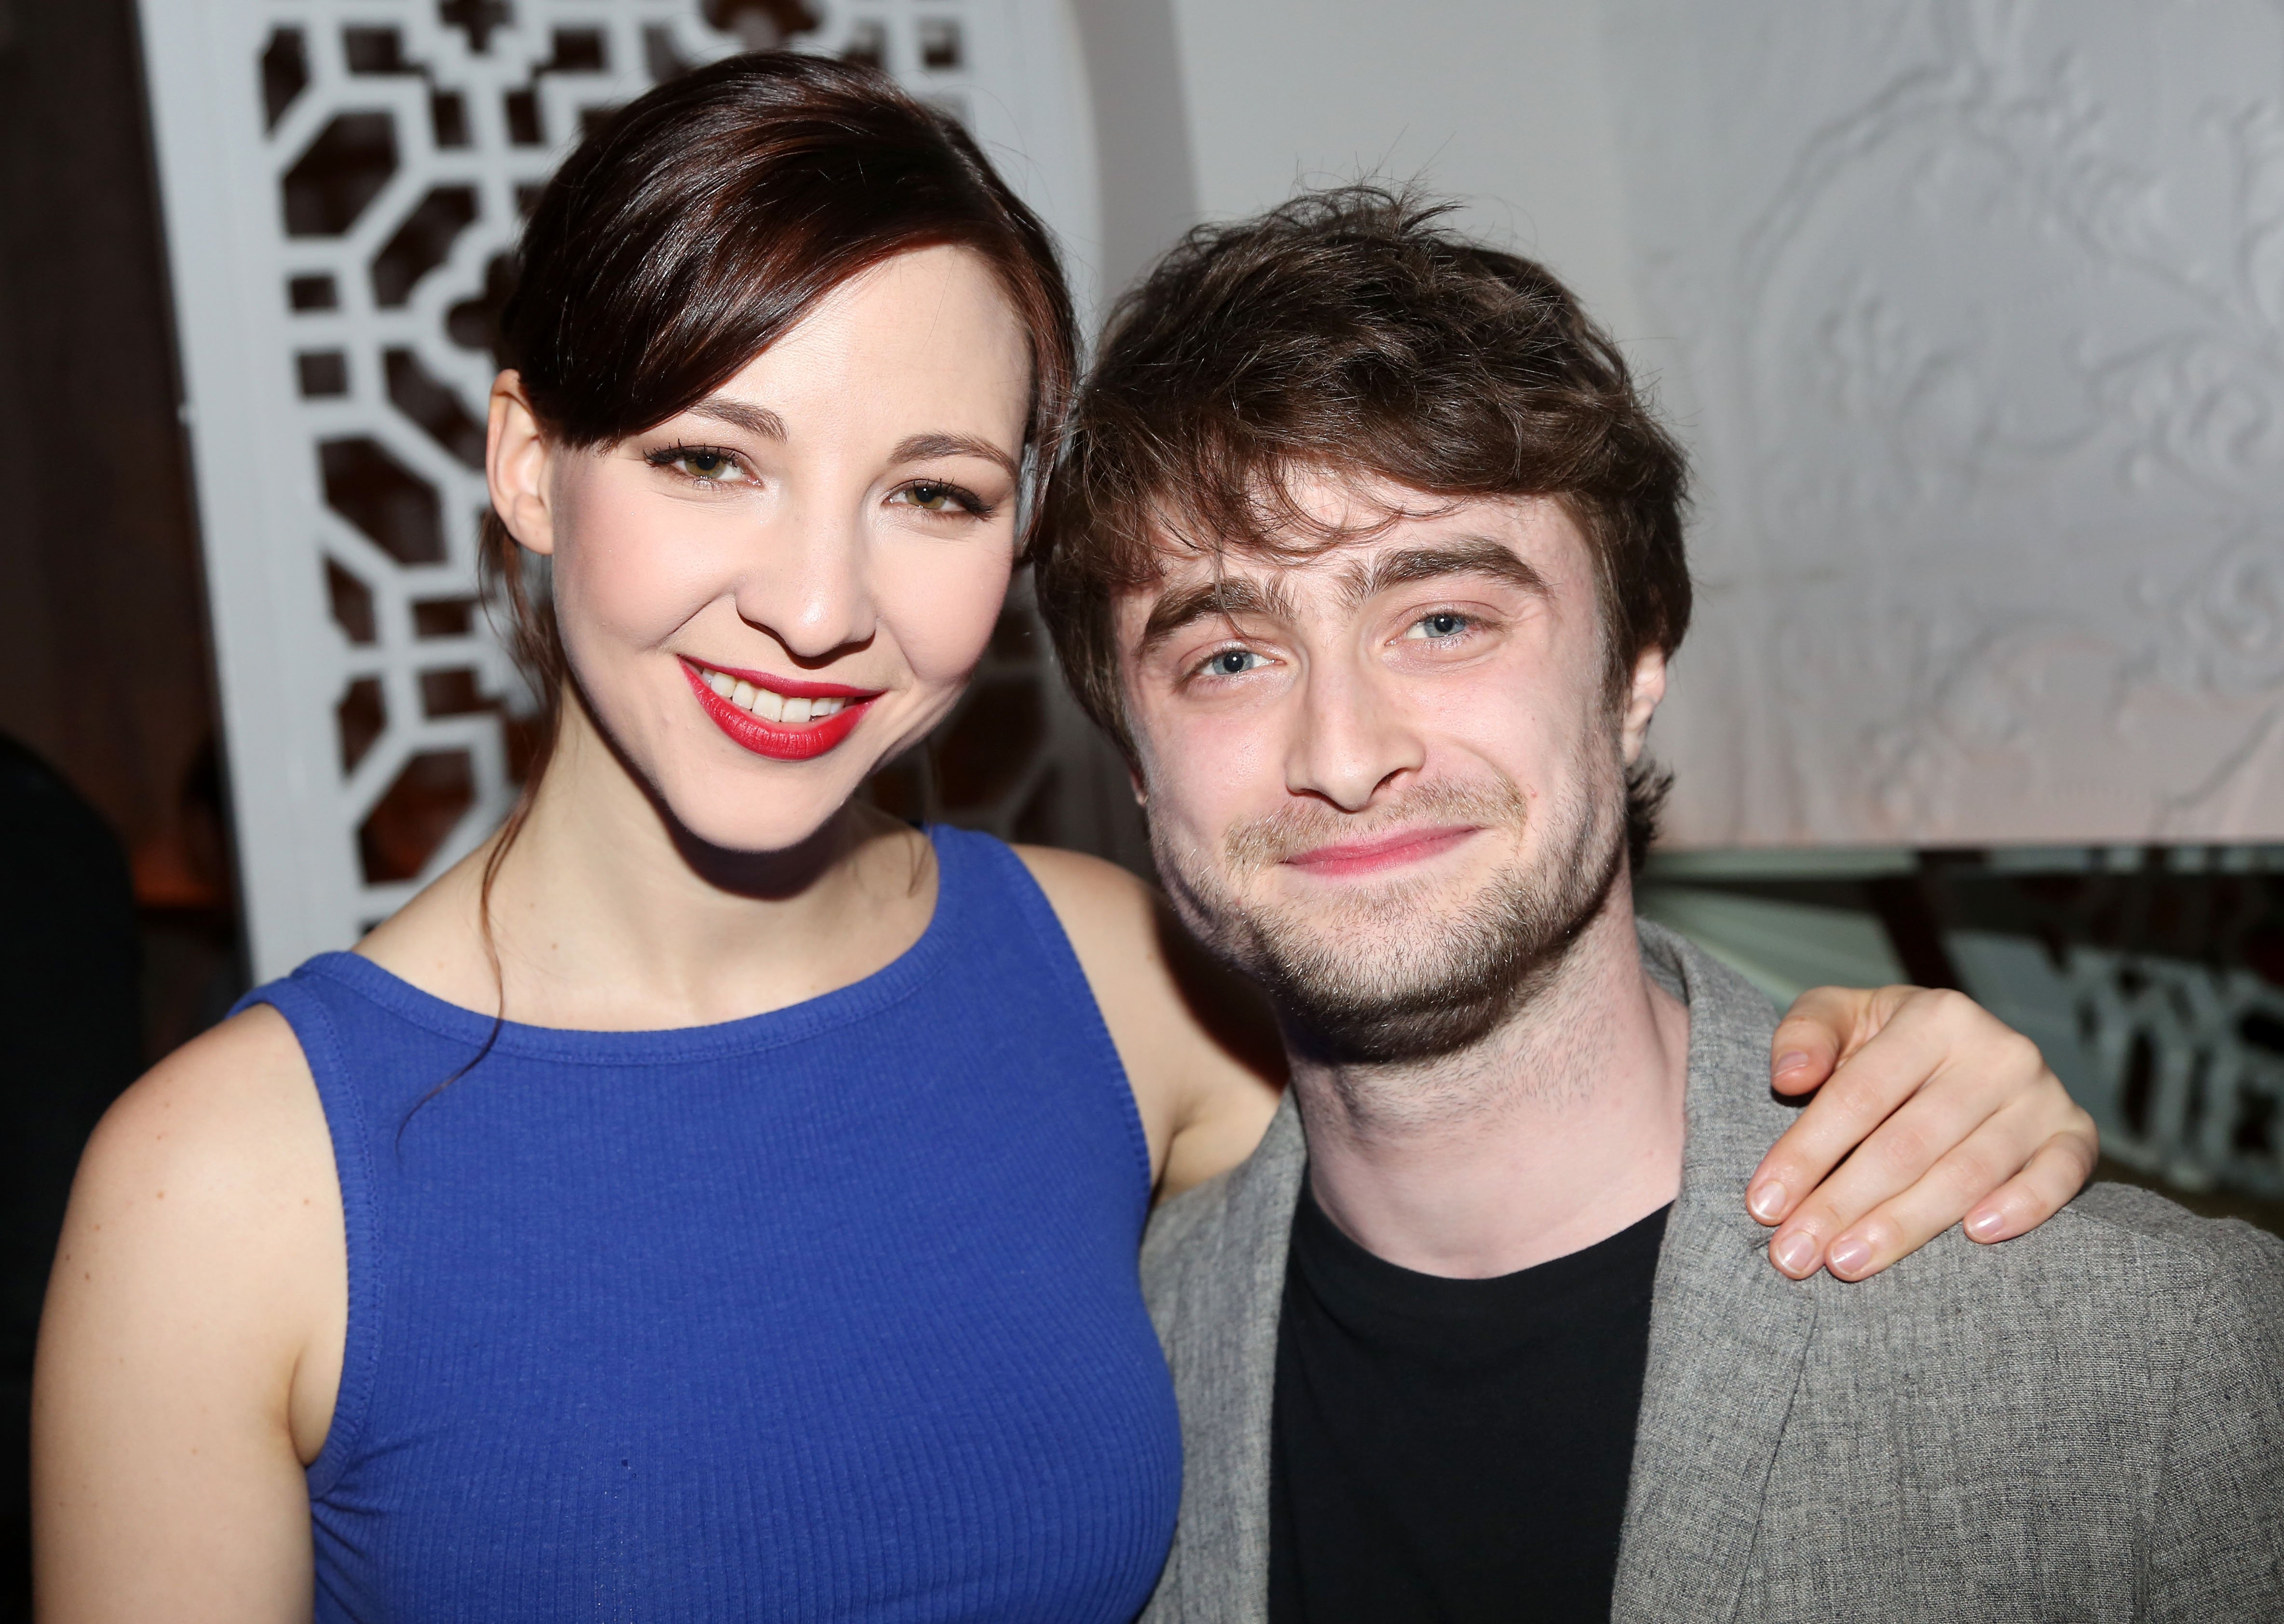 Erin Darke in a blue dress and Daniel Radcliffe in a gray suit.